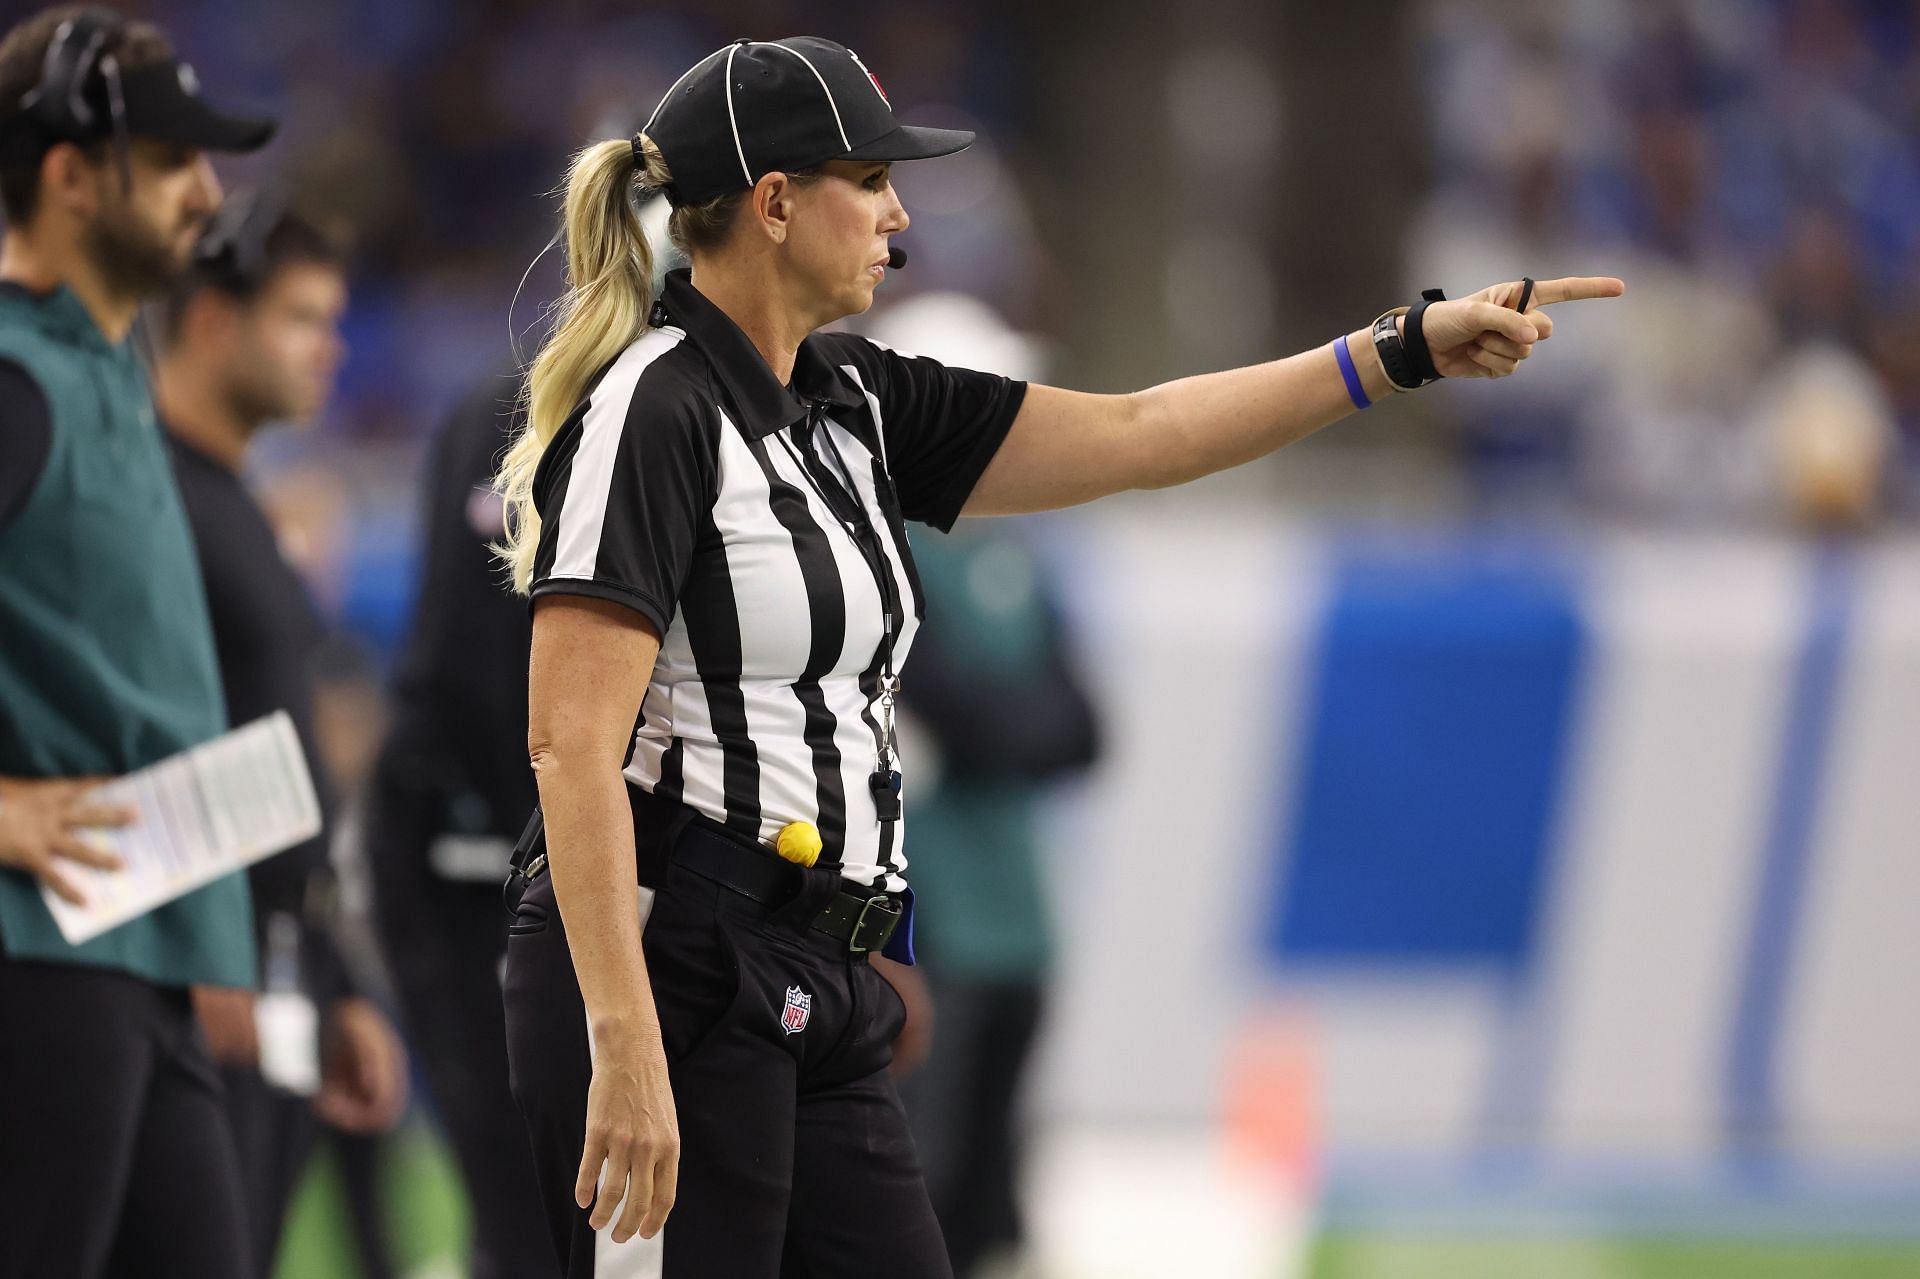 How Many Female Referees Are There In The Nfl In The 2022 Season?